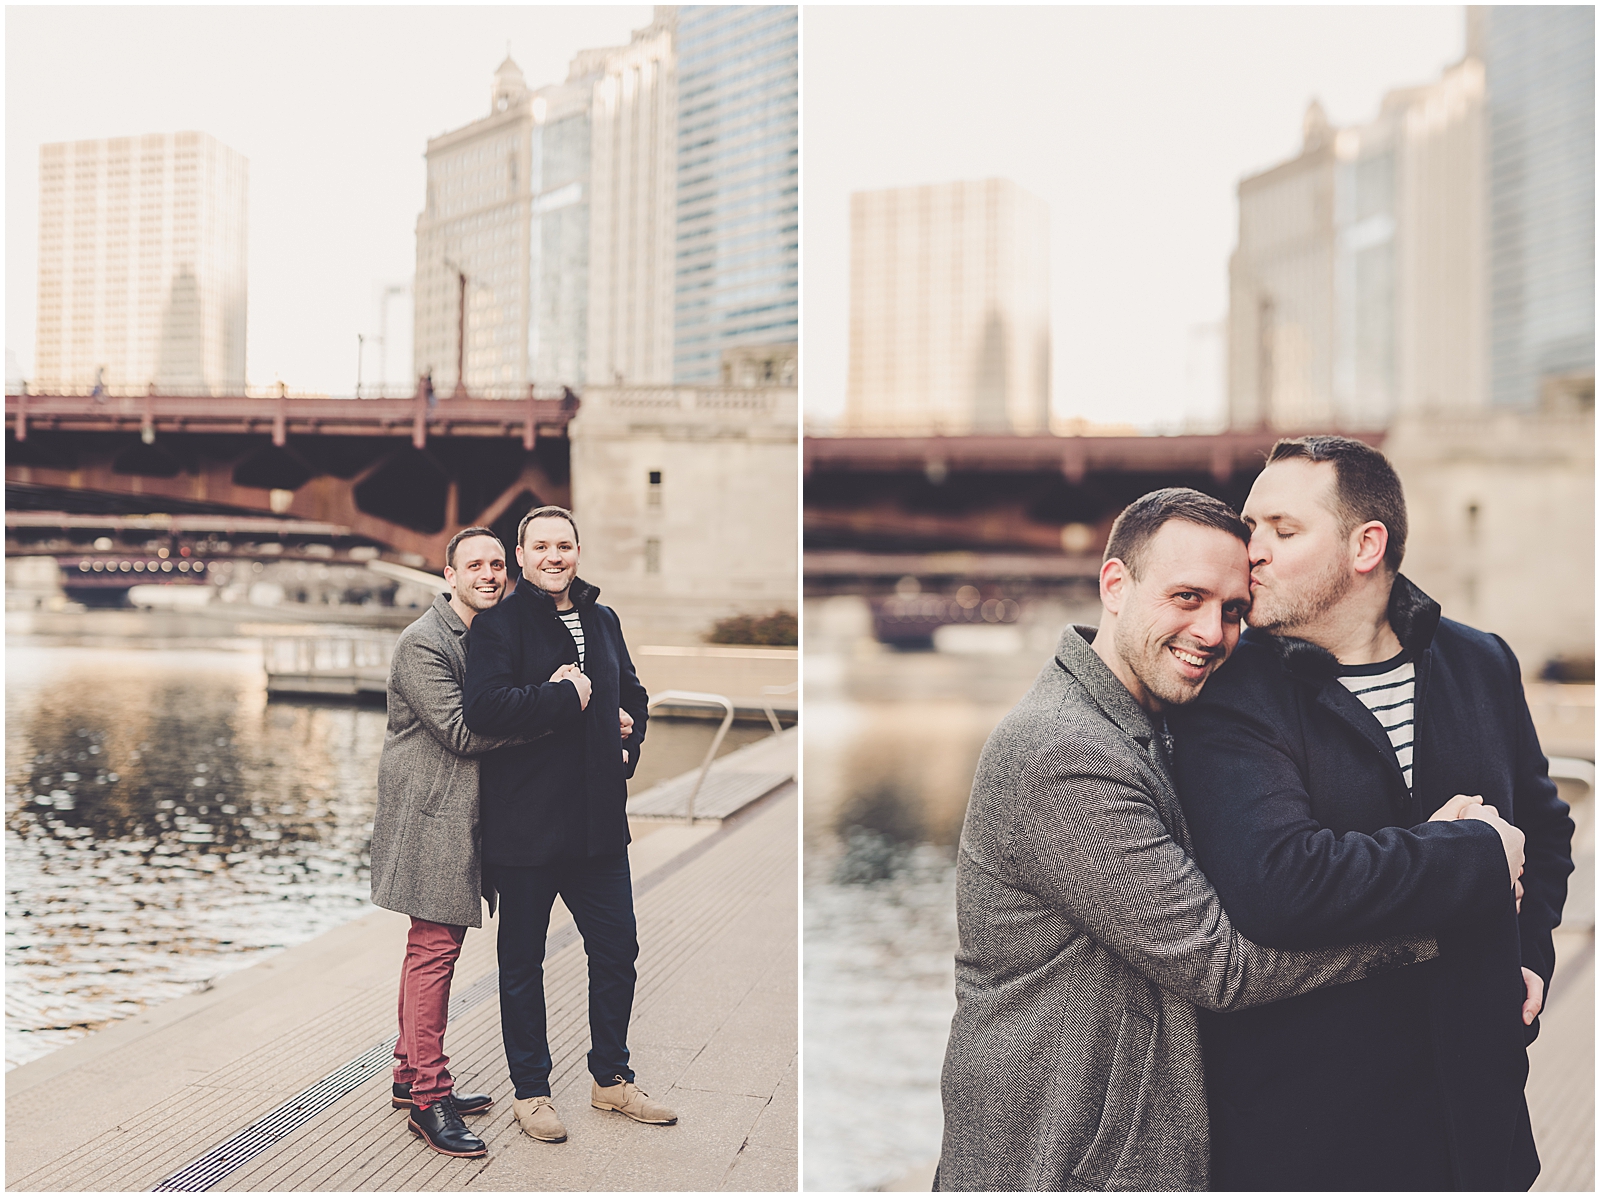 Ben & Michael's Wrigley Building & North Avenue Beach skyline engagement photos in Chicago with Chicago photographer Kara Evans Photographer.